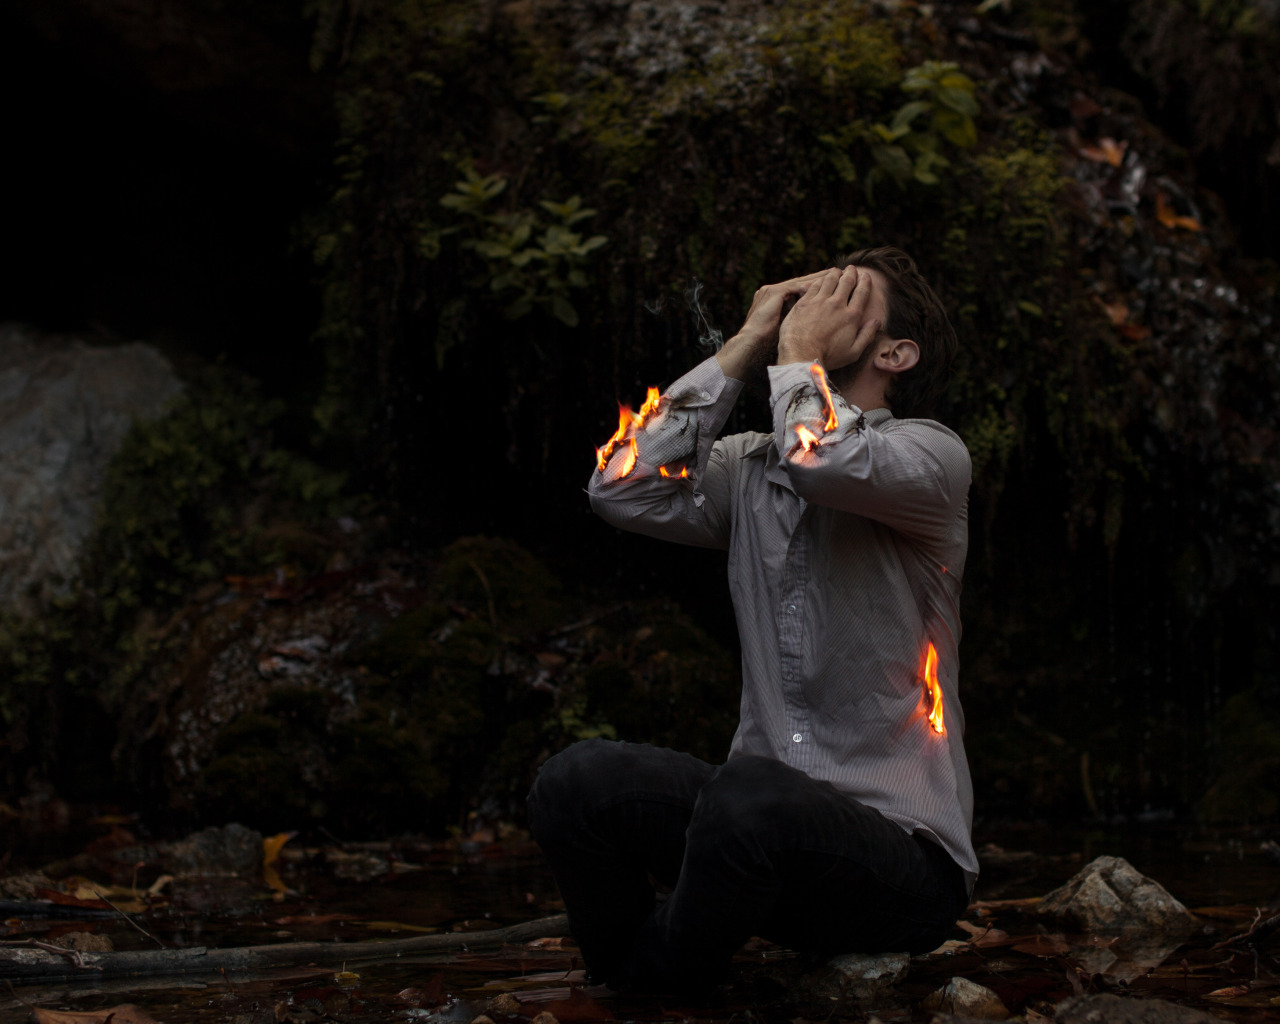 346/365
Some only pray when they’re scared.
I went back to Malibu with Joshua Malik today to shoot some more photos! I set myself on fire while he submerged himself into the freezing cold pond!